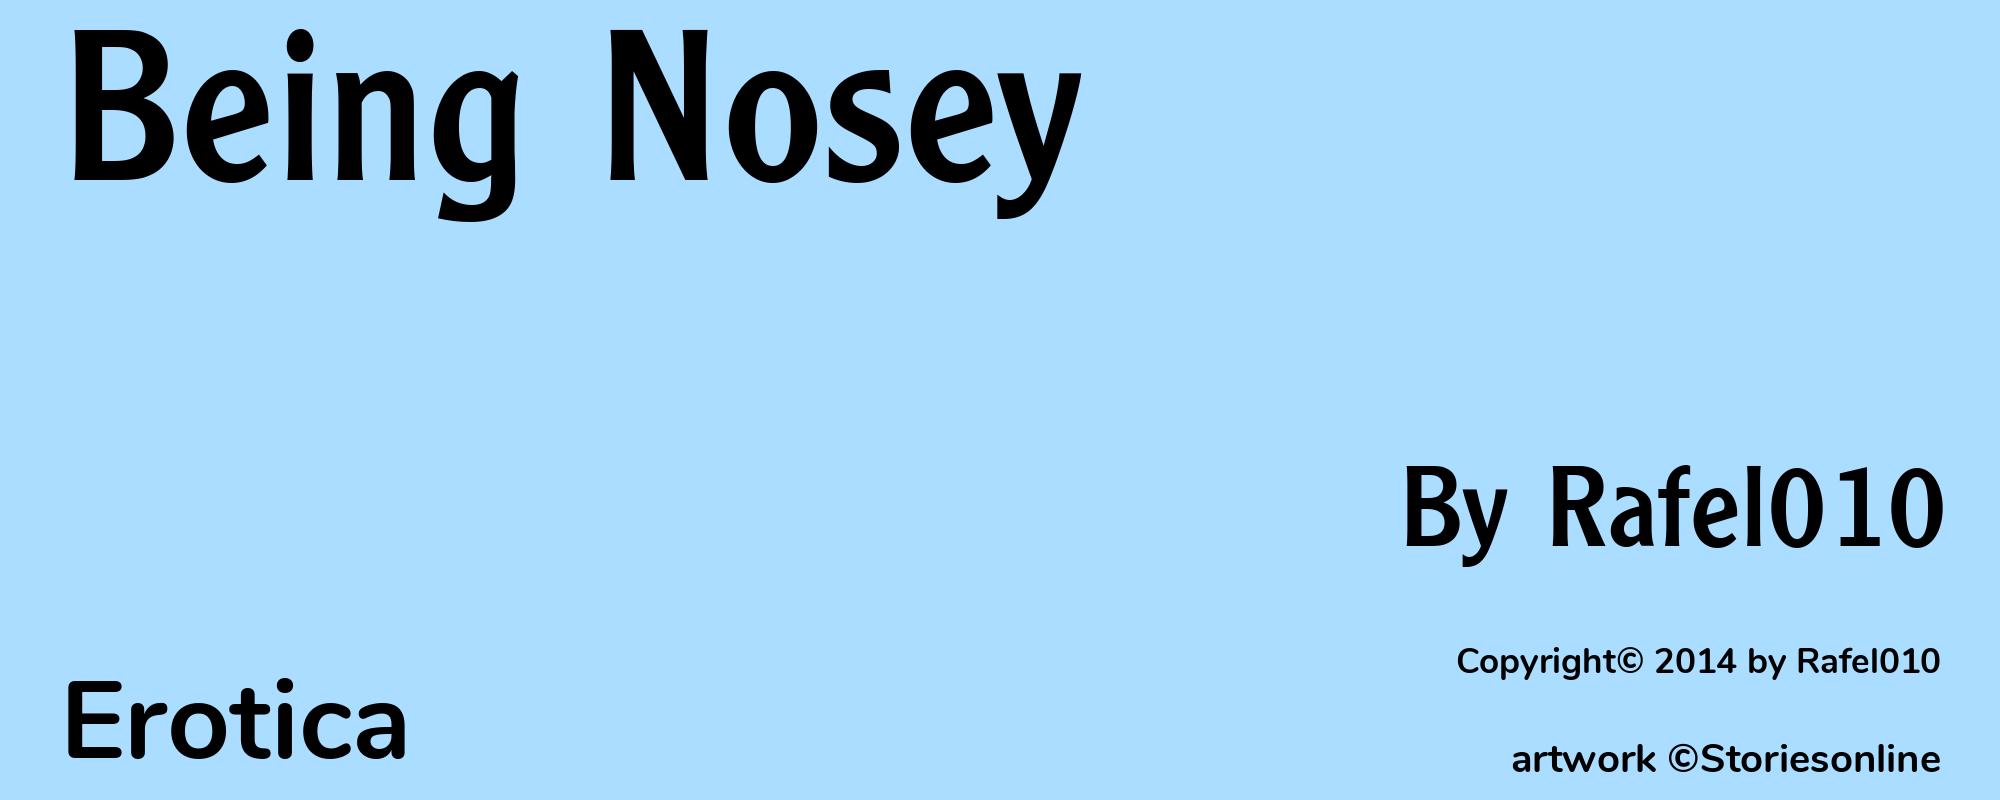 Being Nosey - Cover